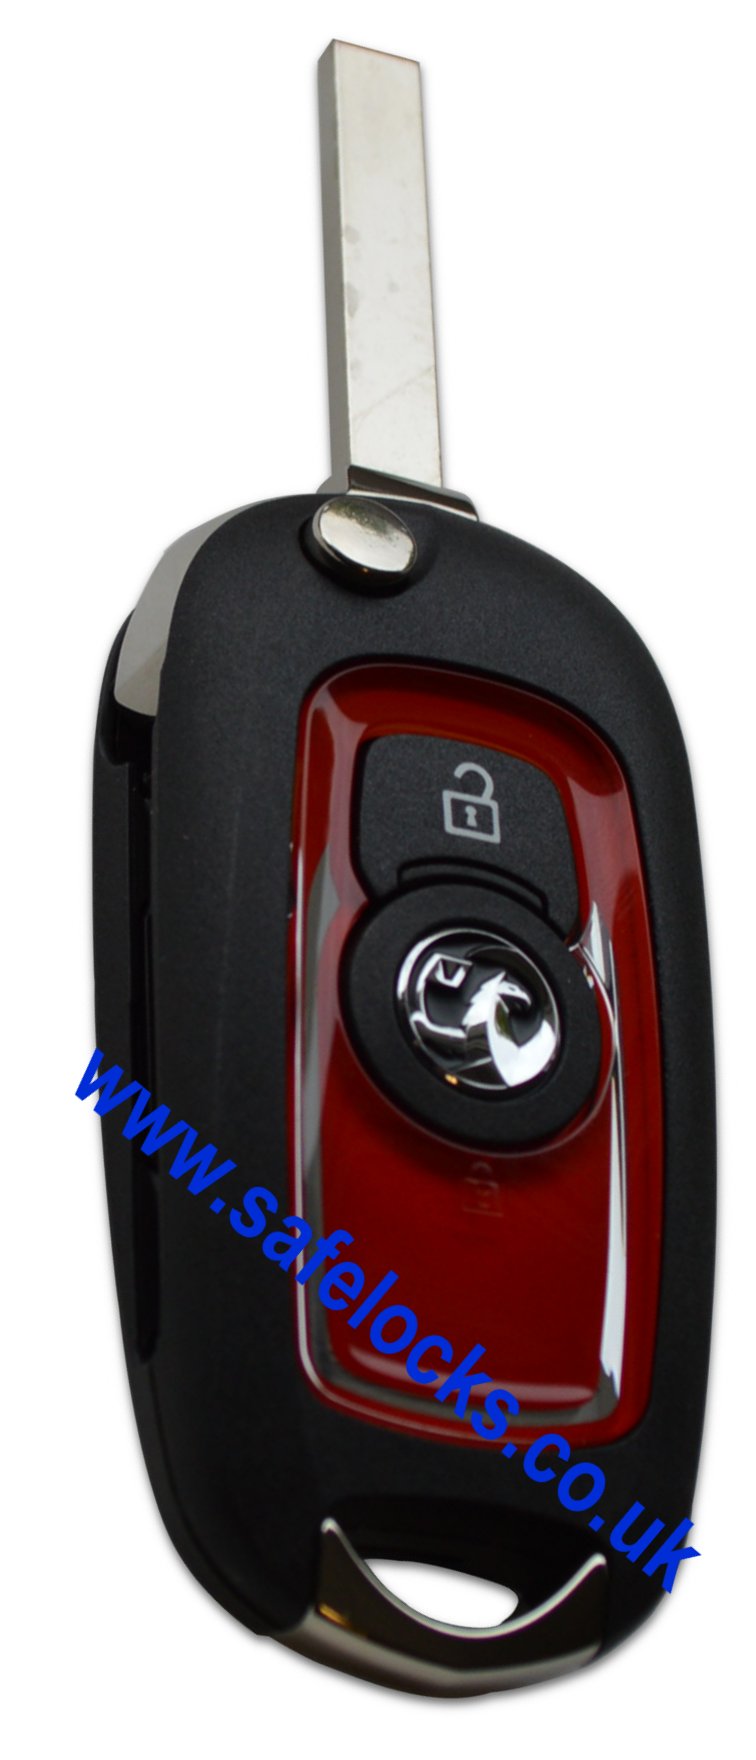 Vauxhall Astra K 2015-2017 Red 2 button remote key fob 39061464